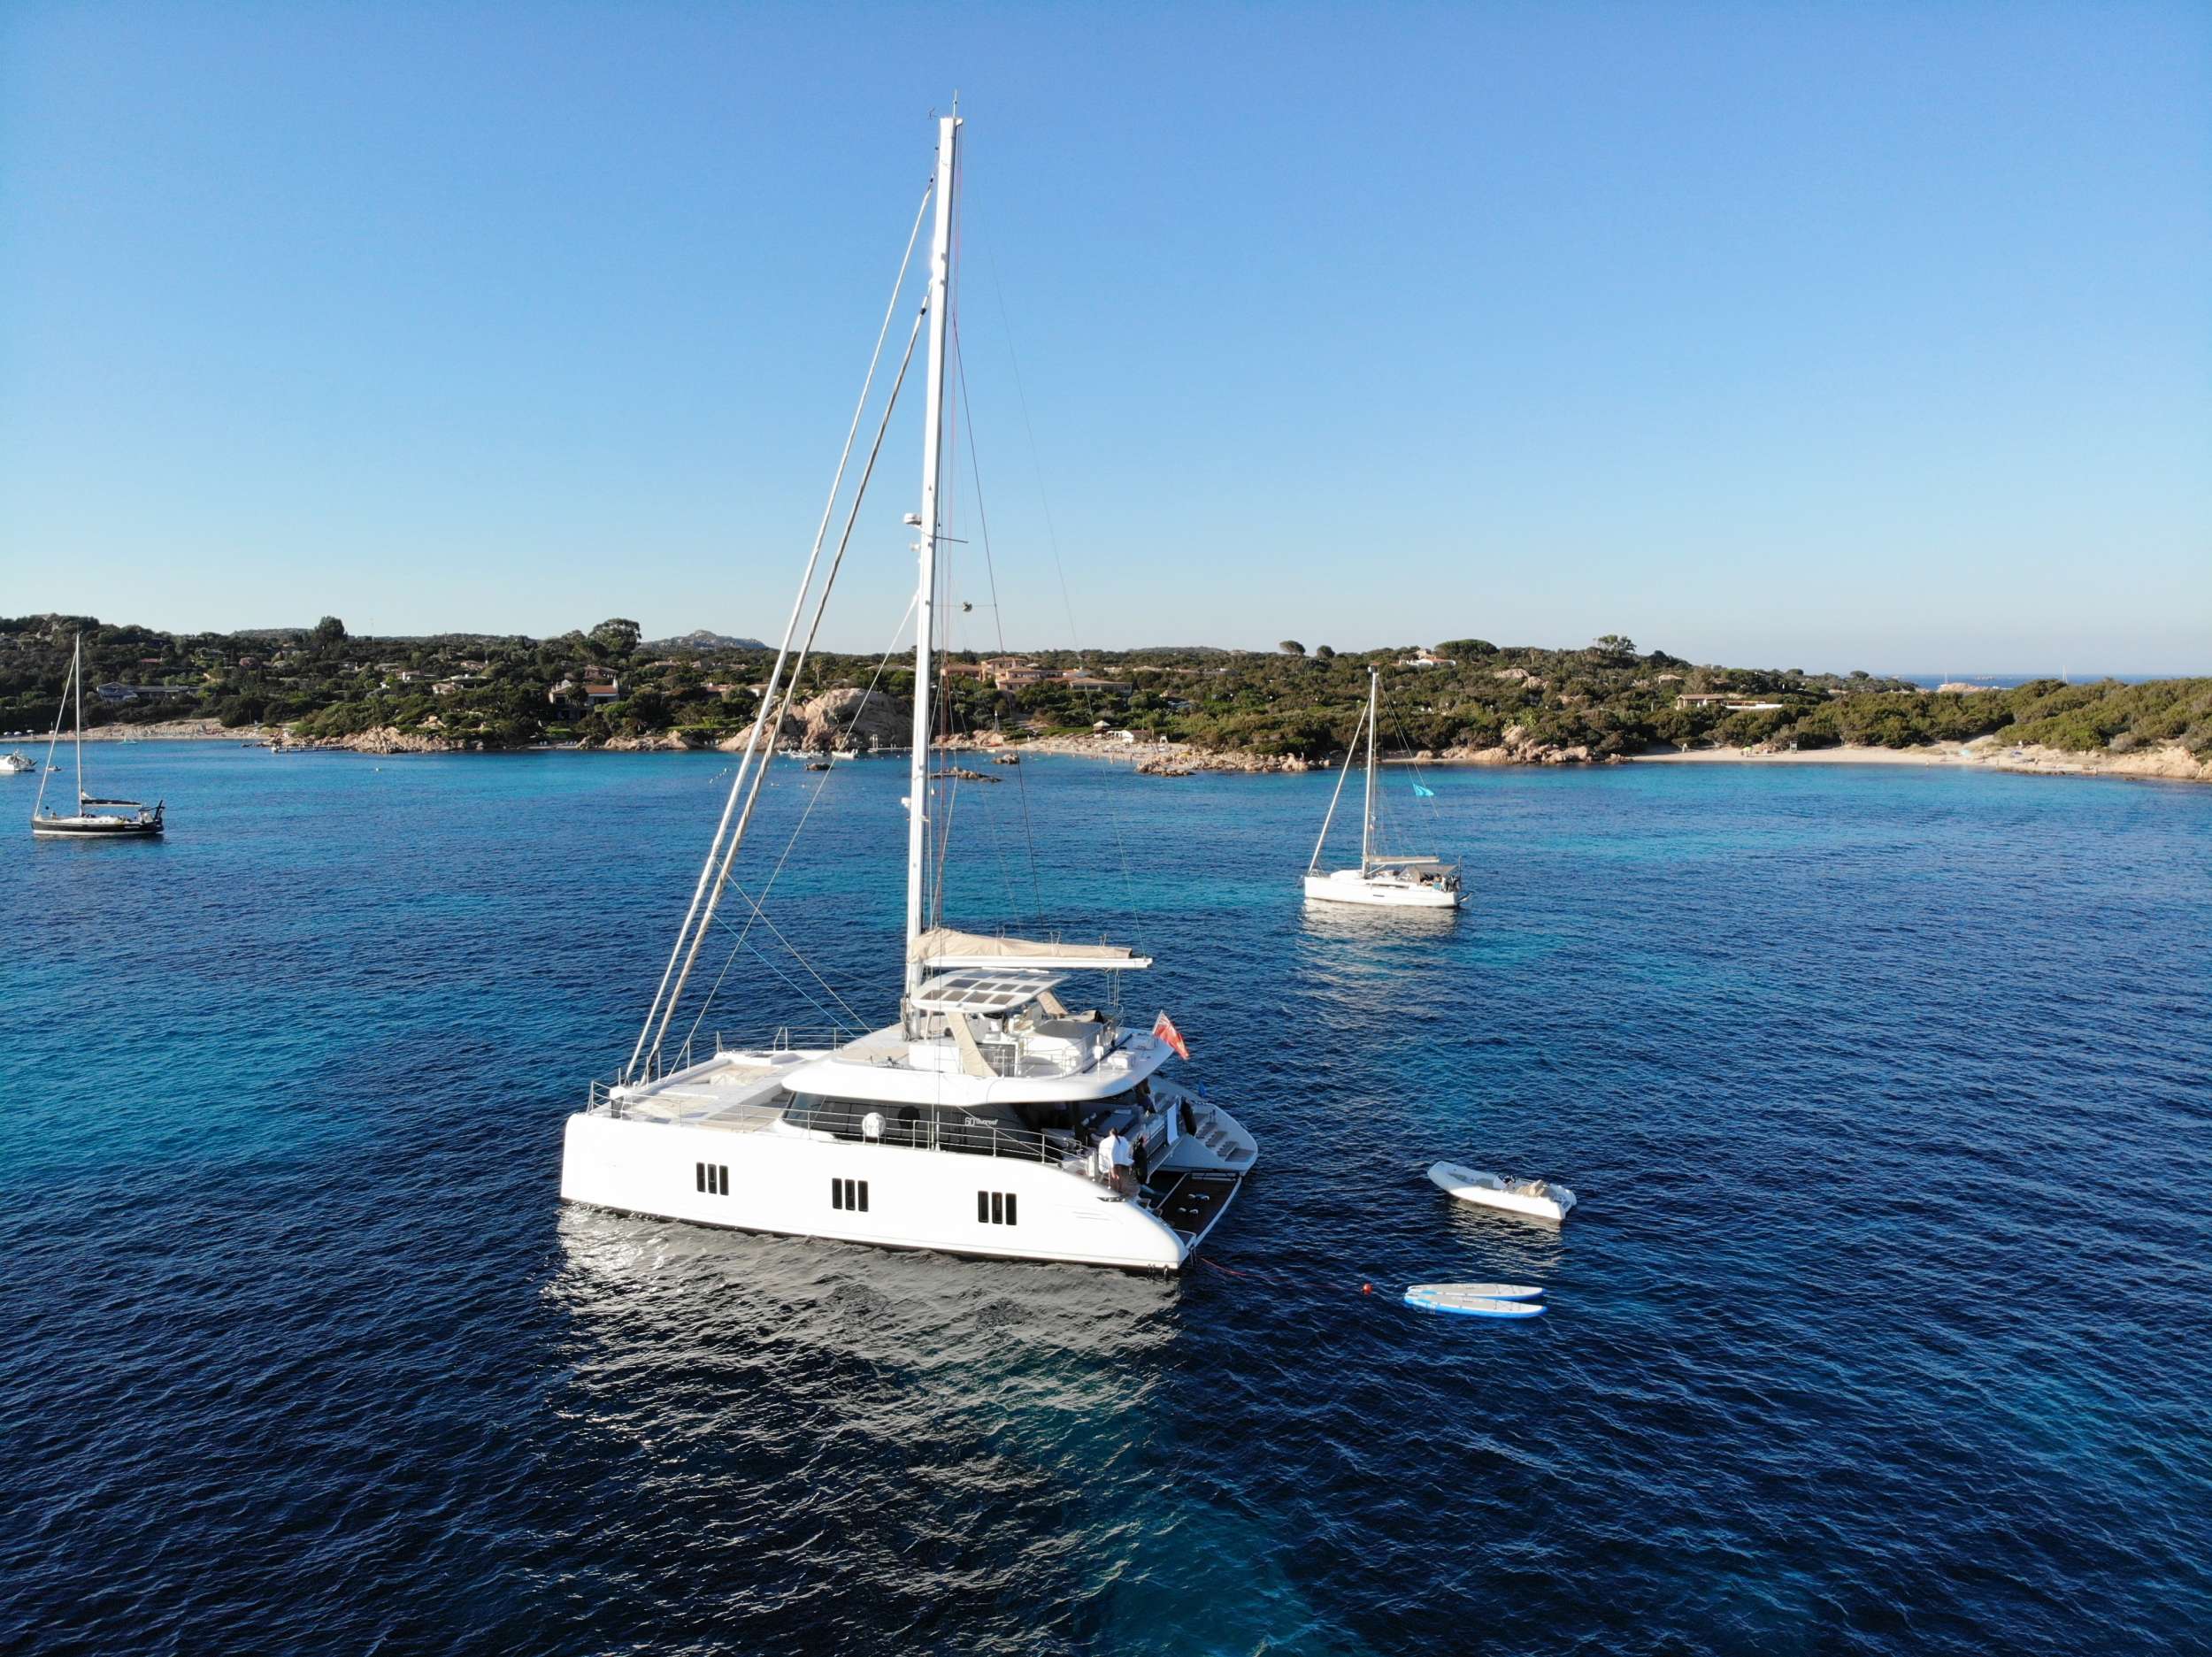 DAWN - Yacht Charter Cannes & Boat hire in Fr. Riviera, Corsica & Sardinia 1